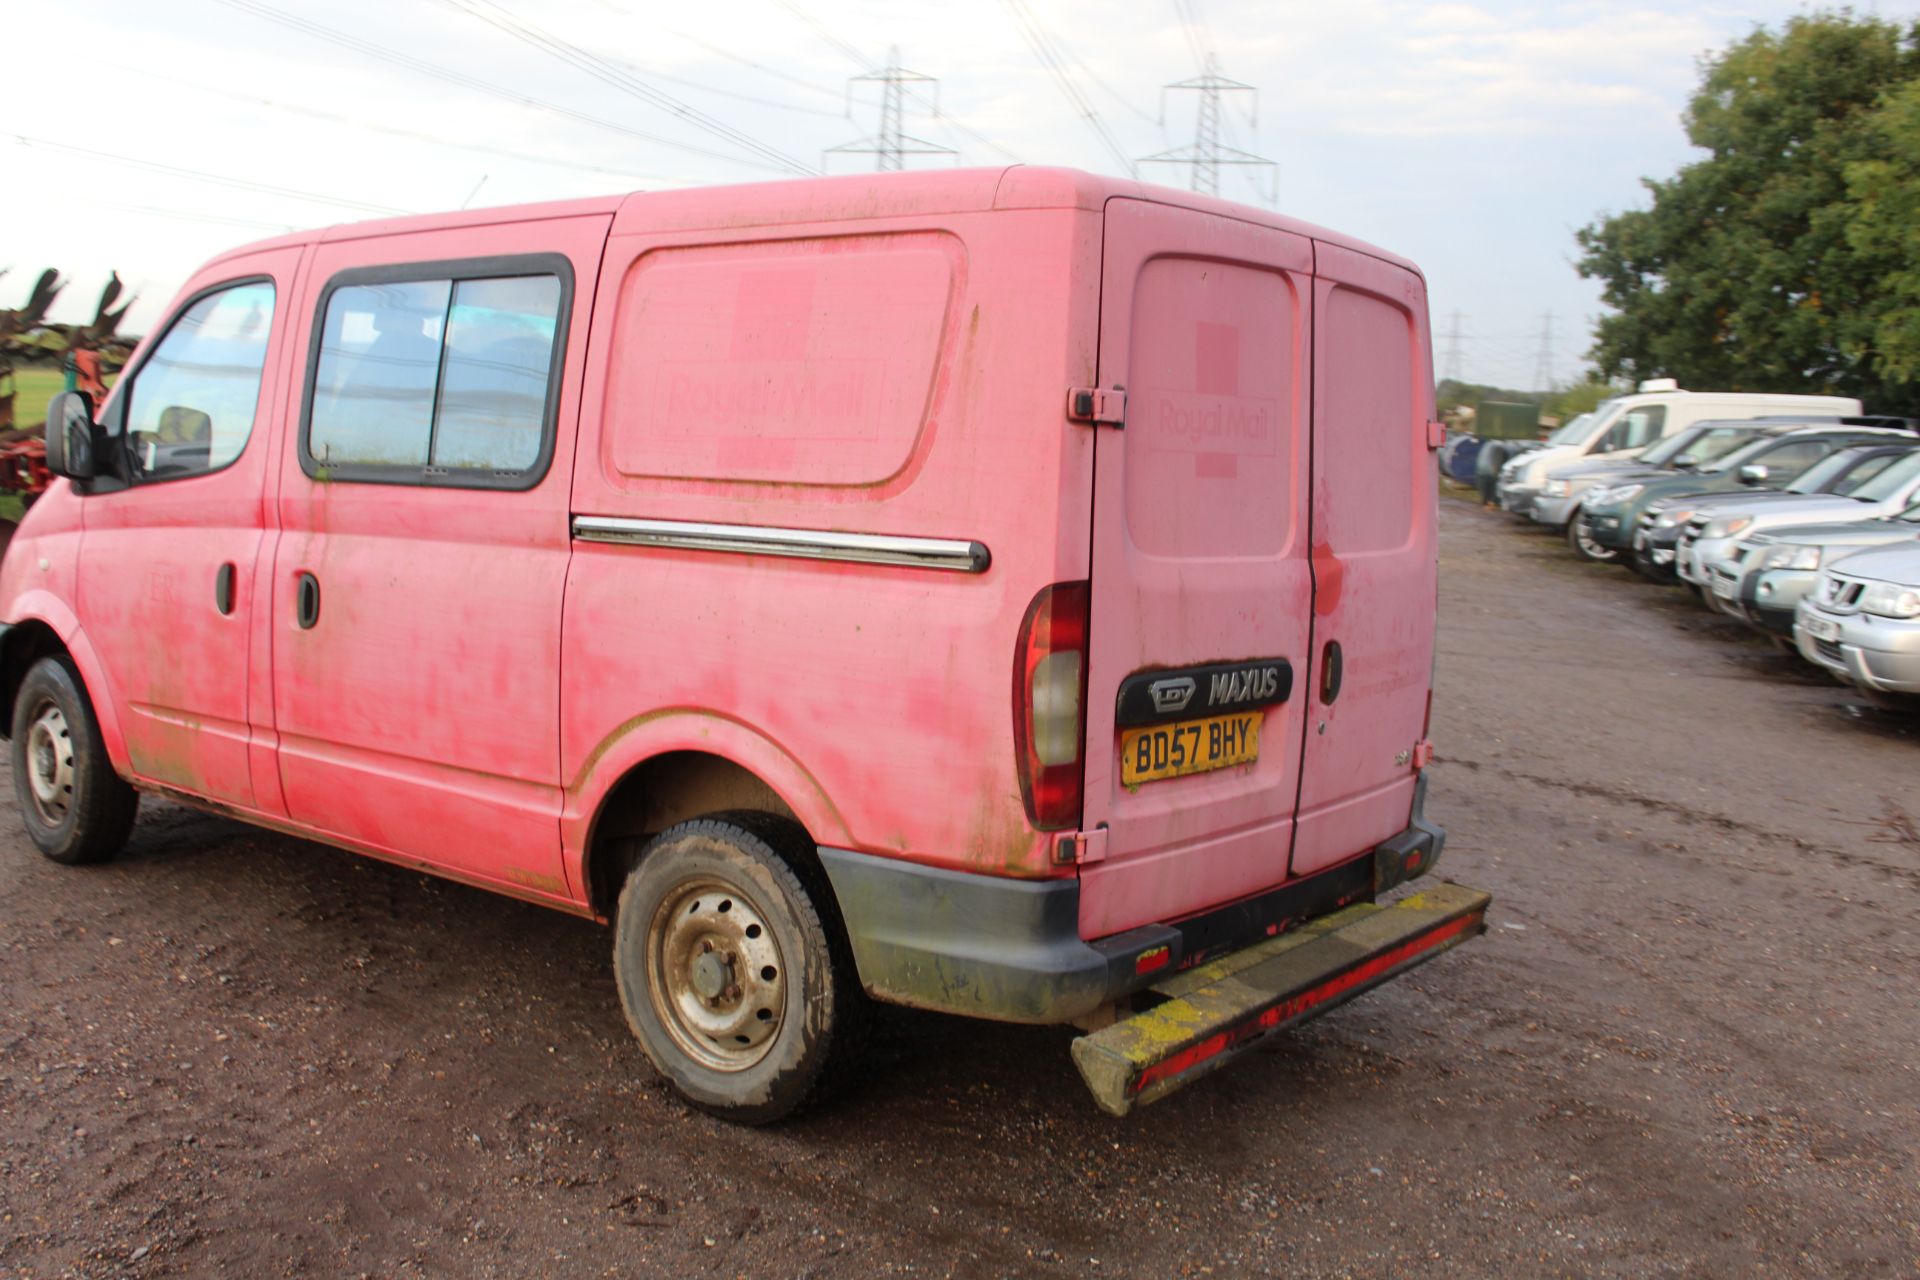 **UPDATED DESCRIPTION** LDV 2.8/95 Maxus crew cab panel van. Registration BD57 BHY. Date of first - Image 5 of 52